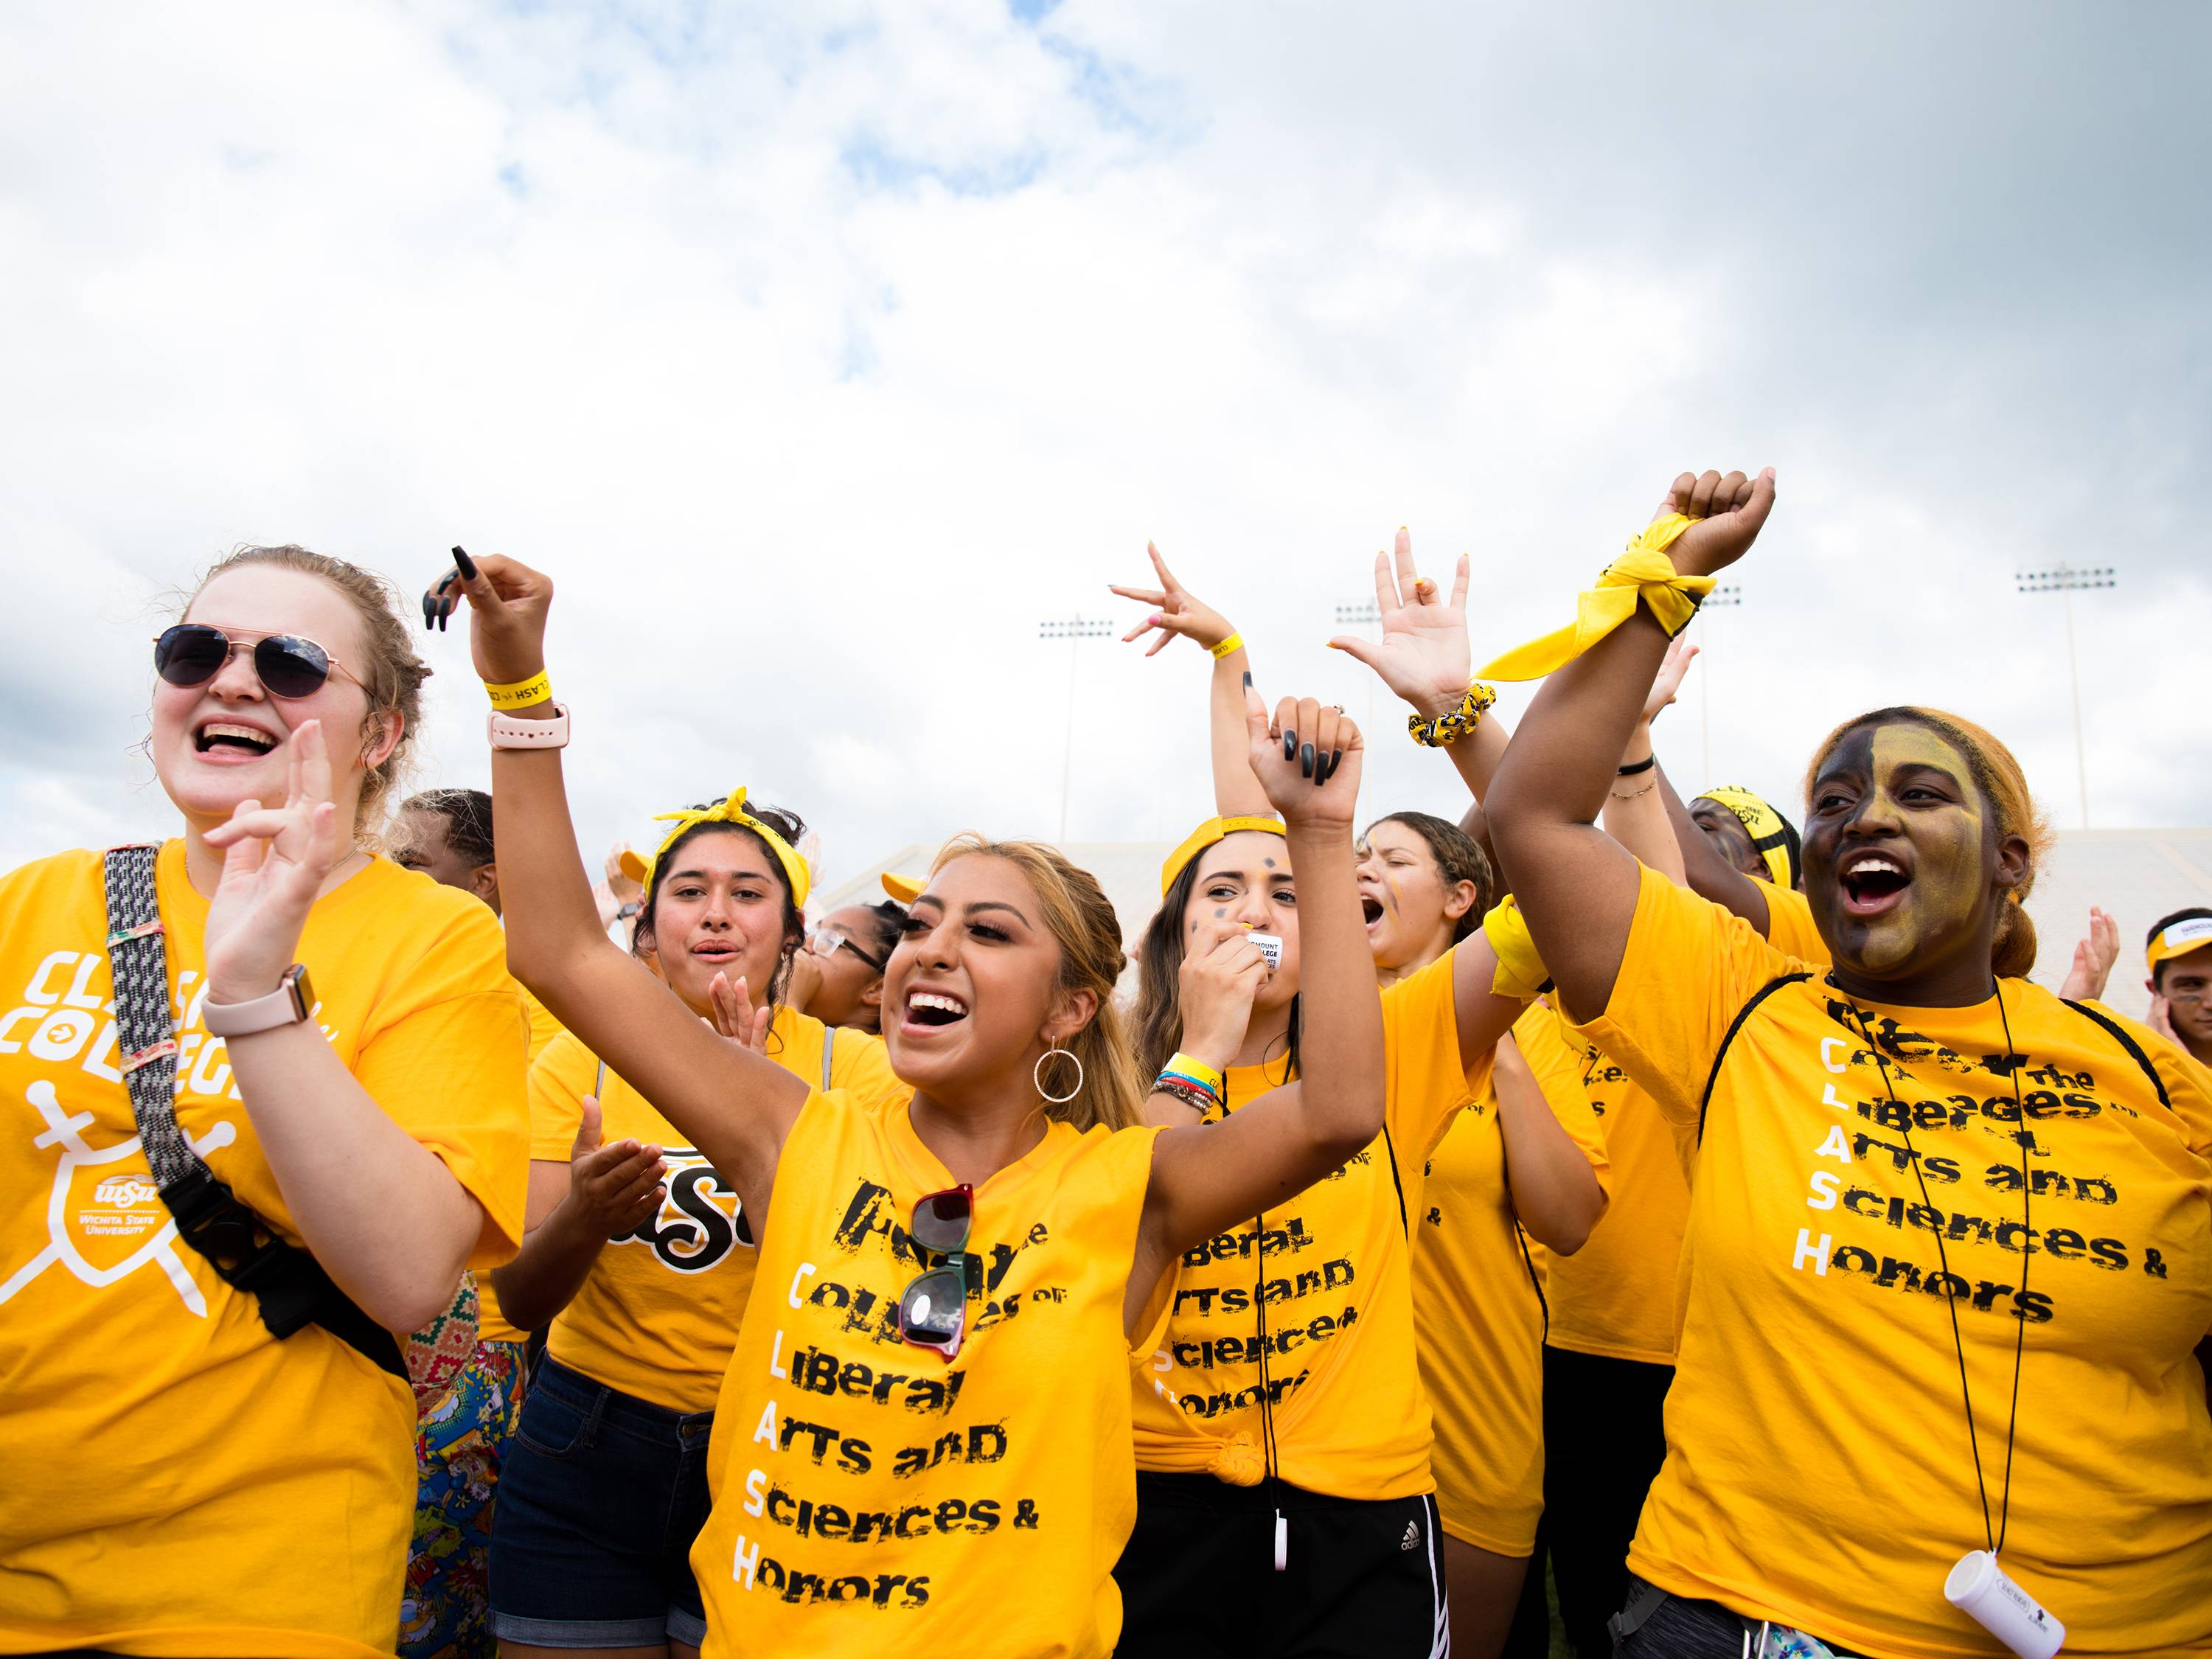 Liberal Arts and Sciences students cheer in the crowd at Clash of the Colleges